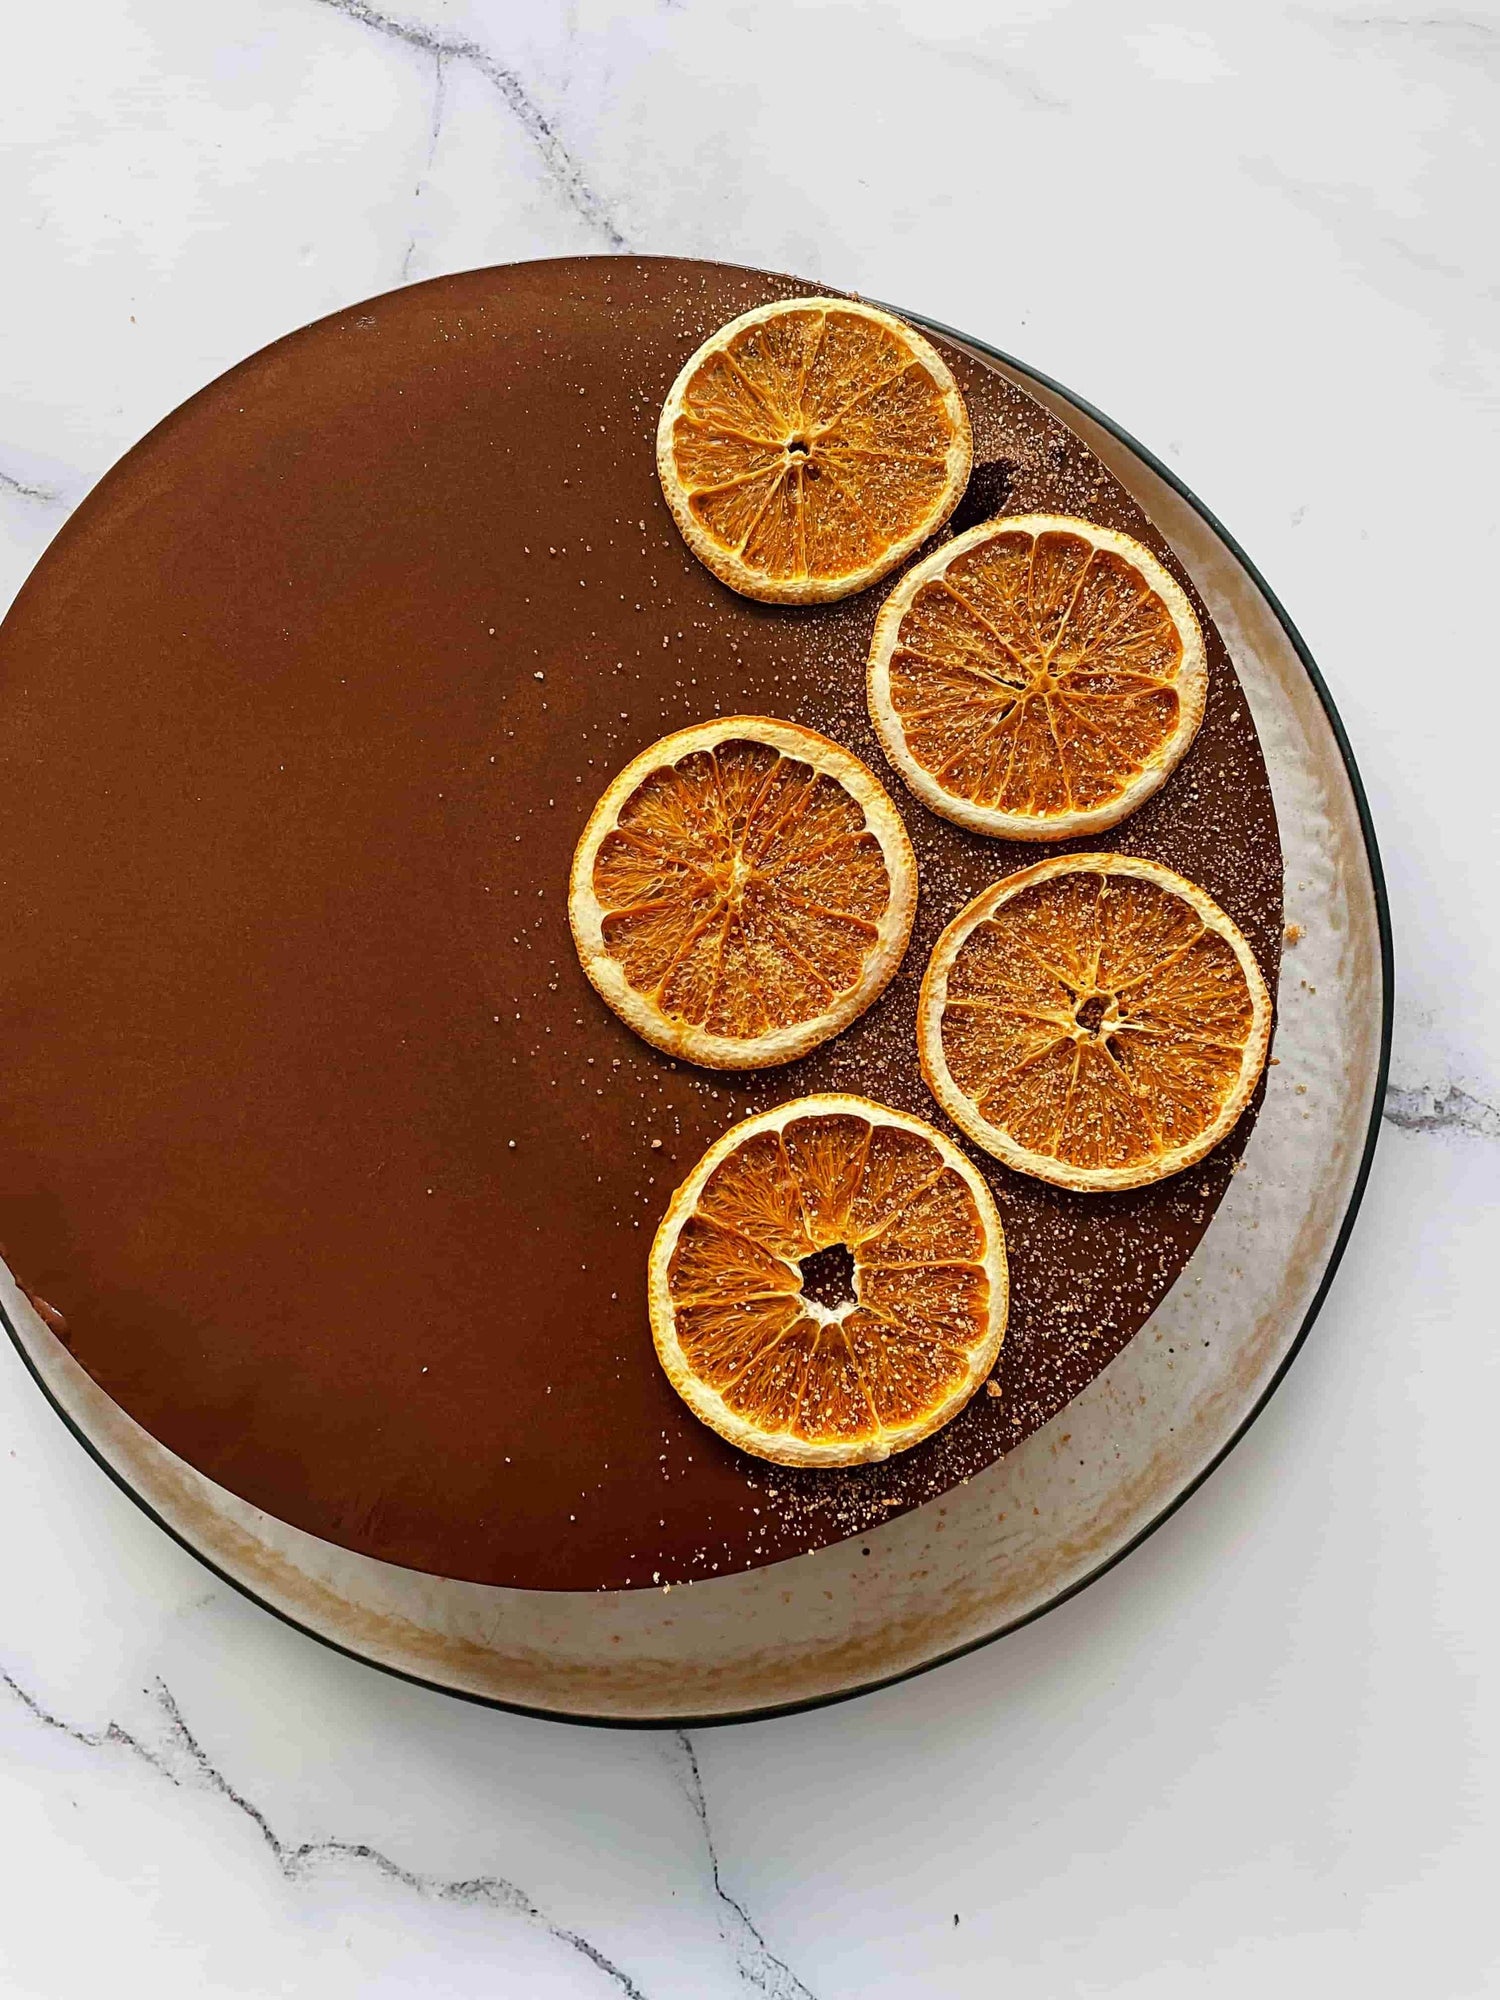 Chocolate Mousse Layer Cake Thermomix